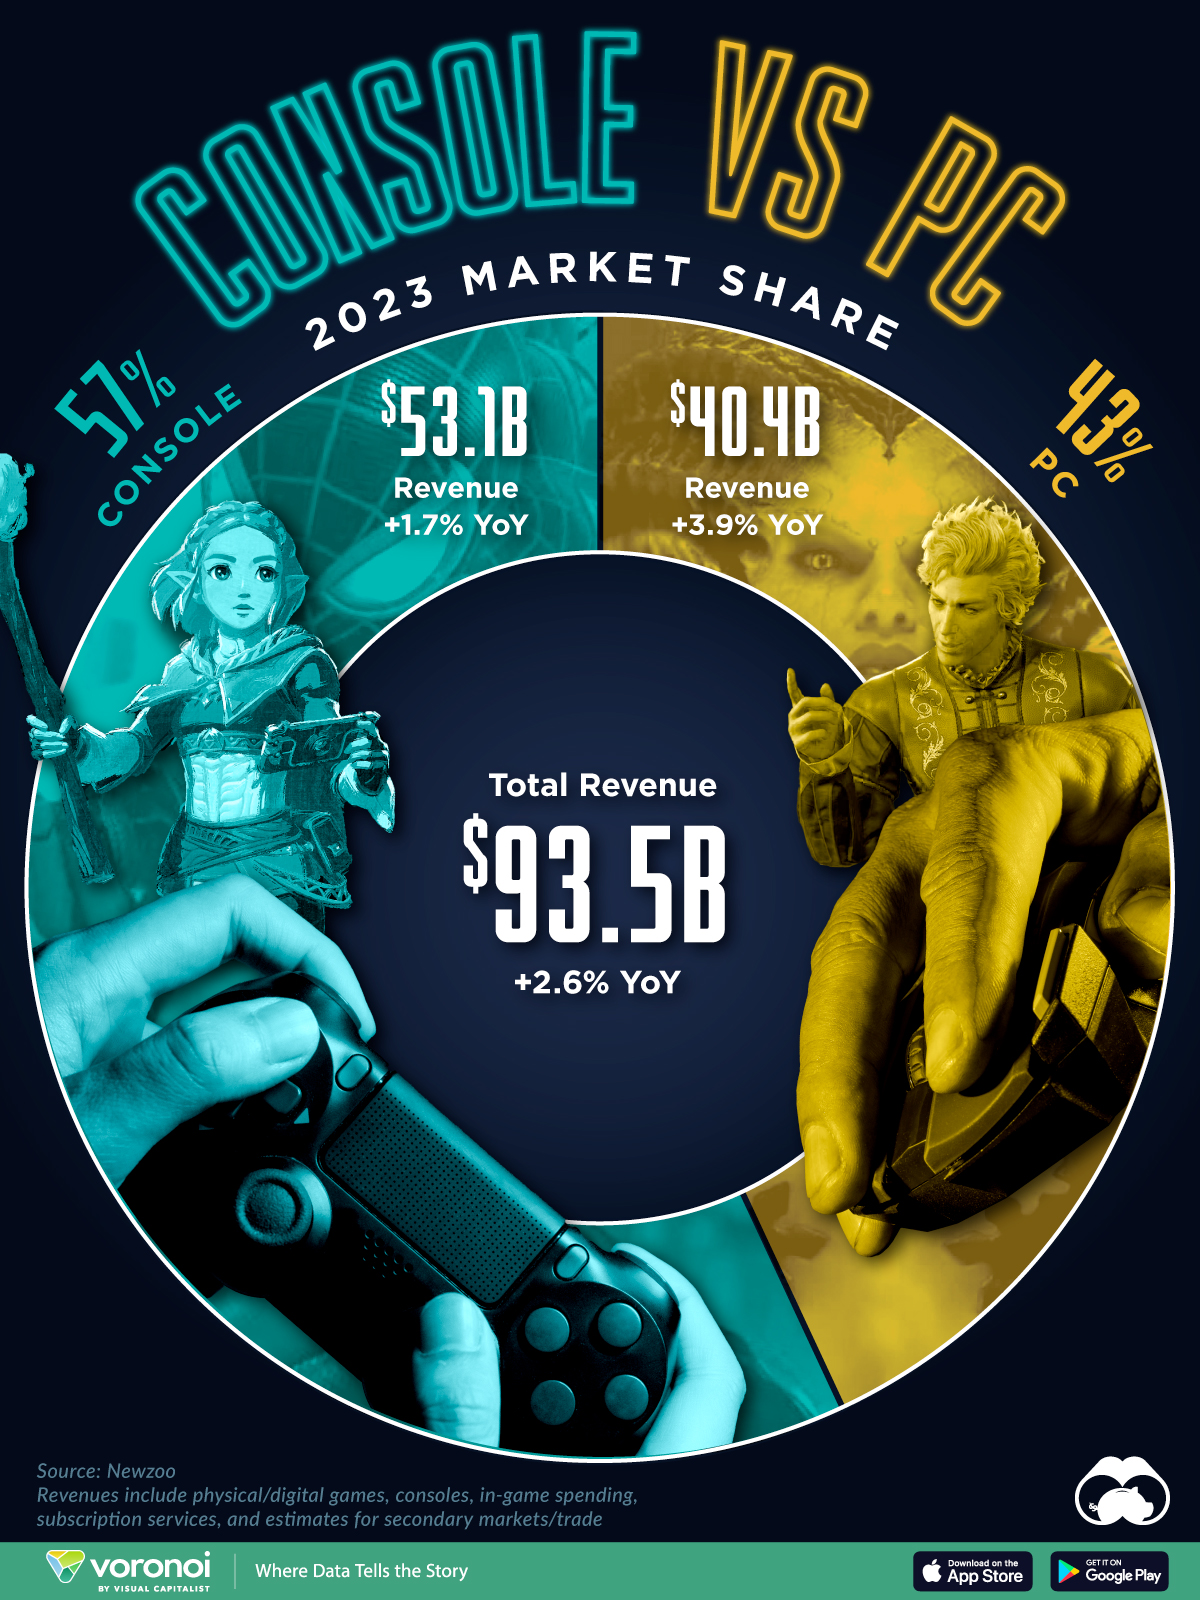 Visualizing PC vs. Console Gaming Market Share